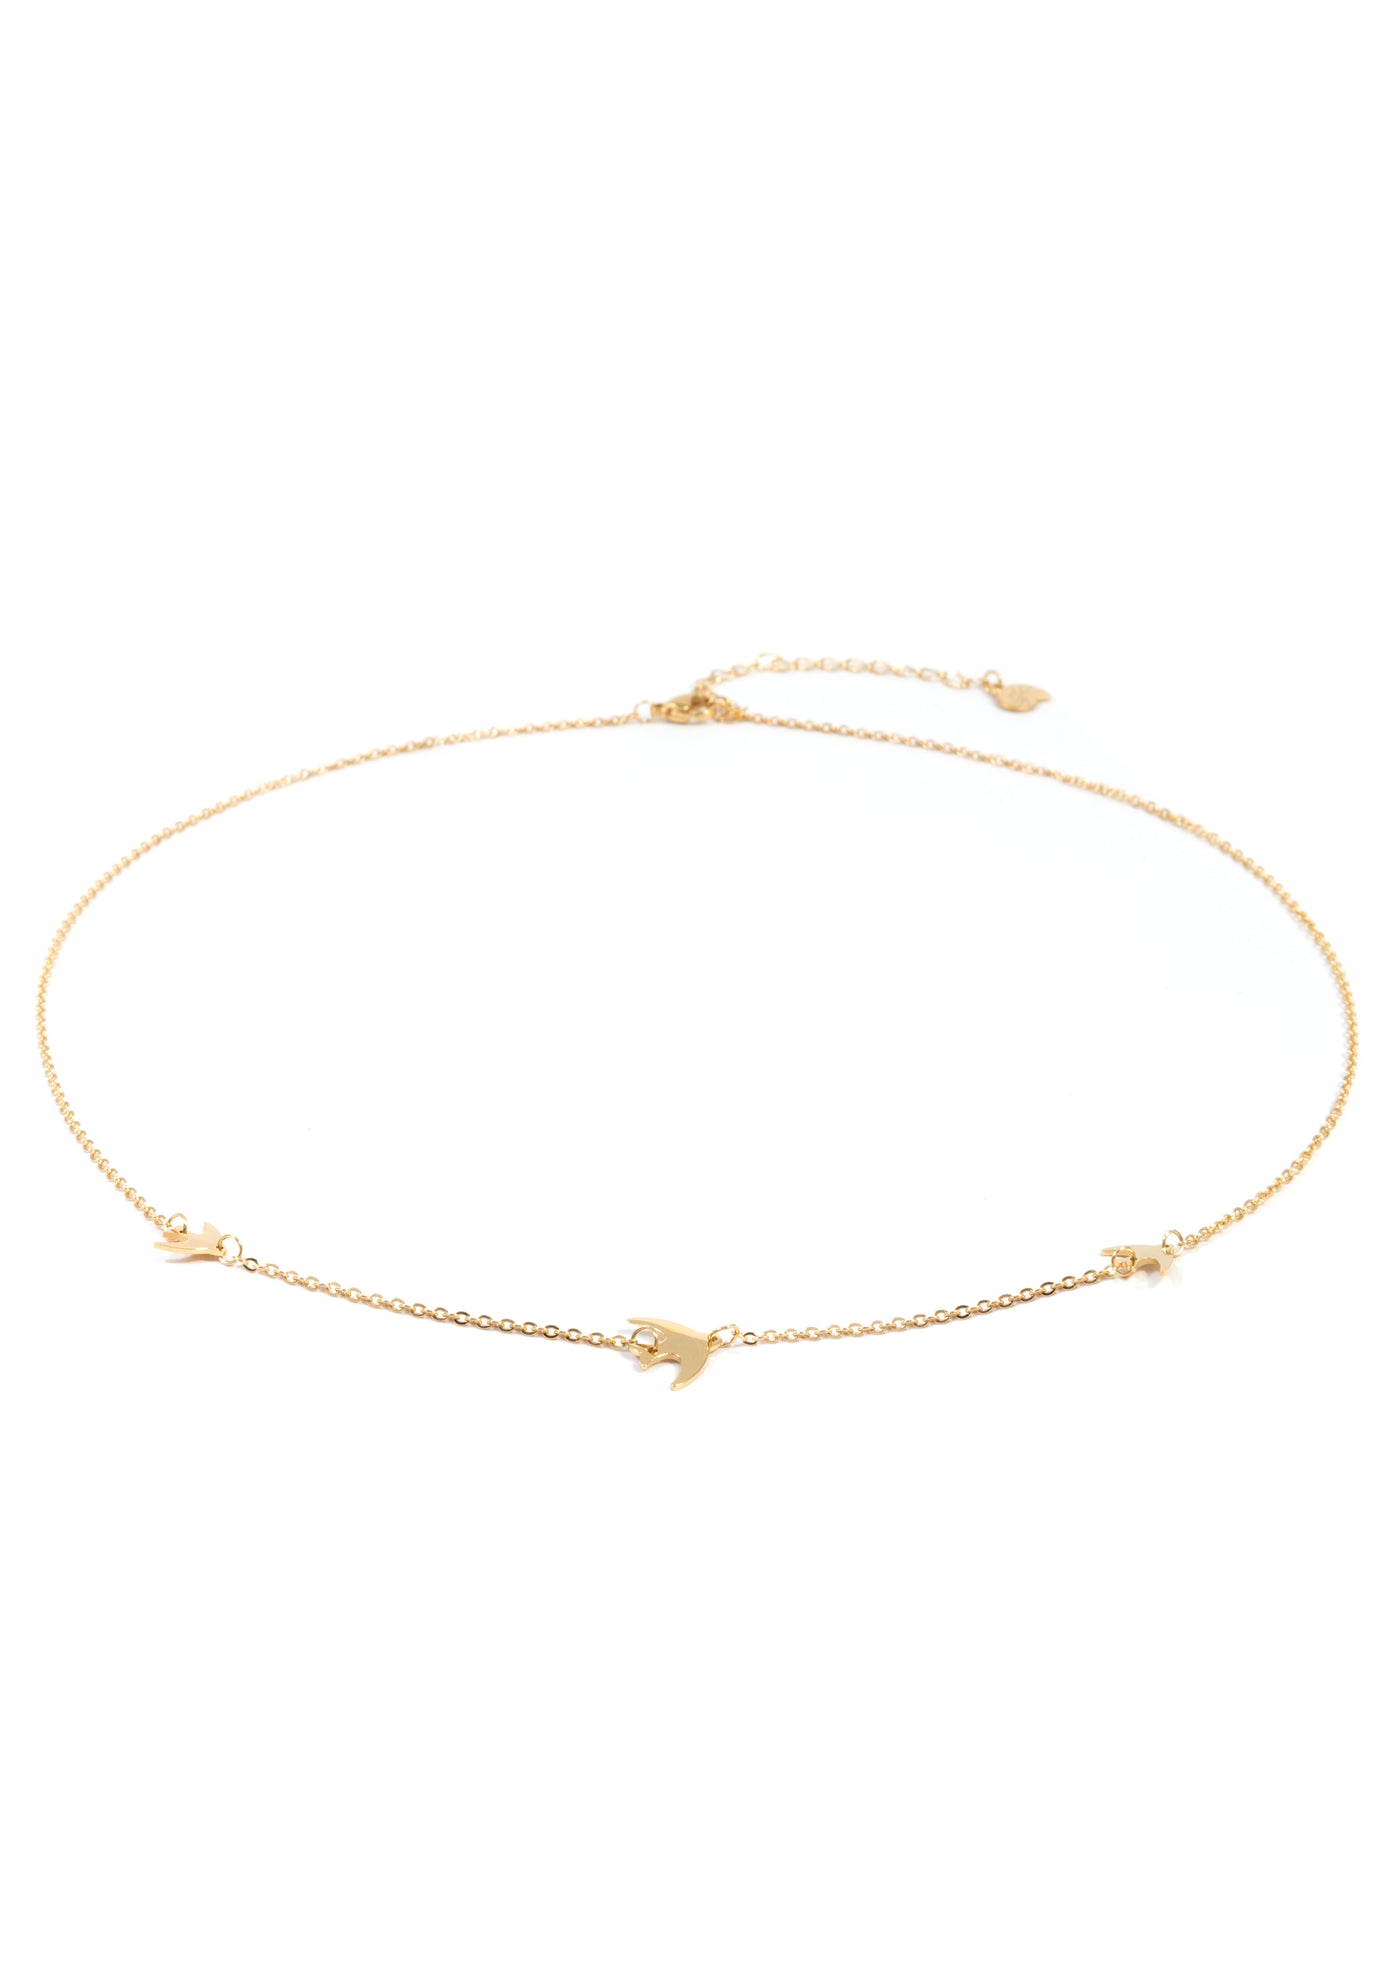 Flying Birds Necklace Gold